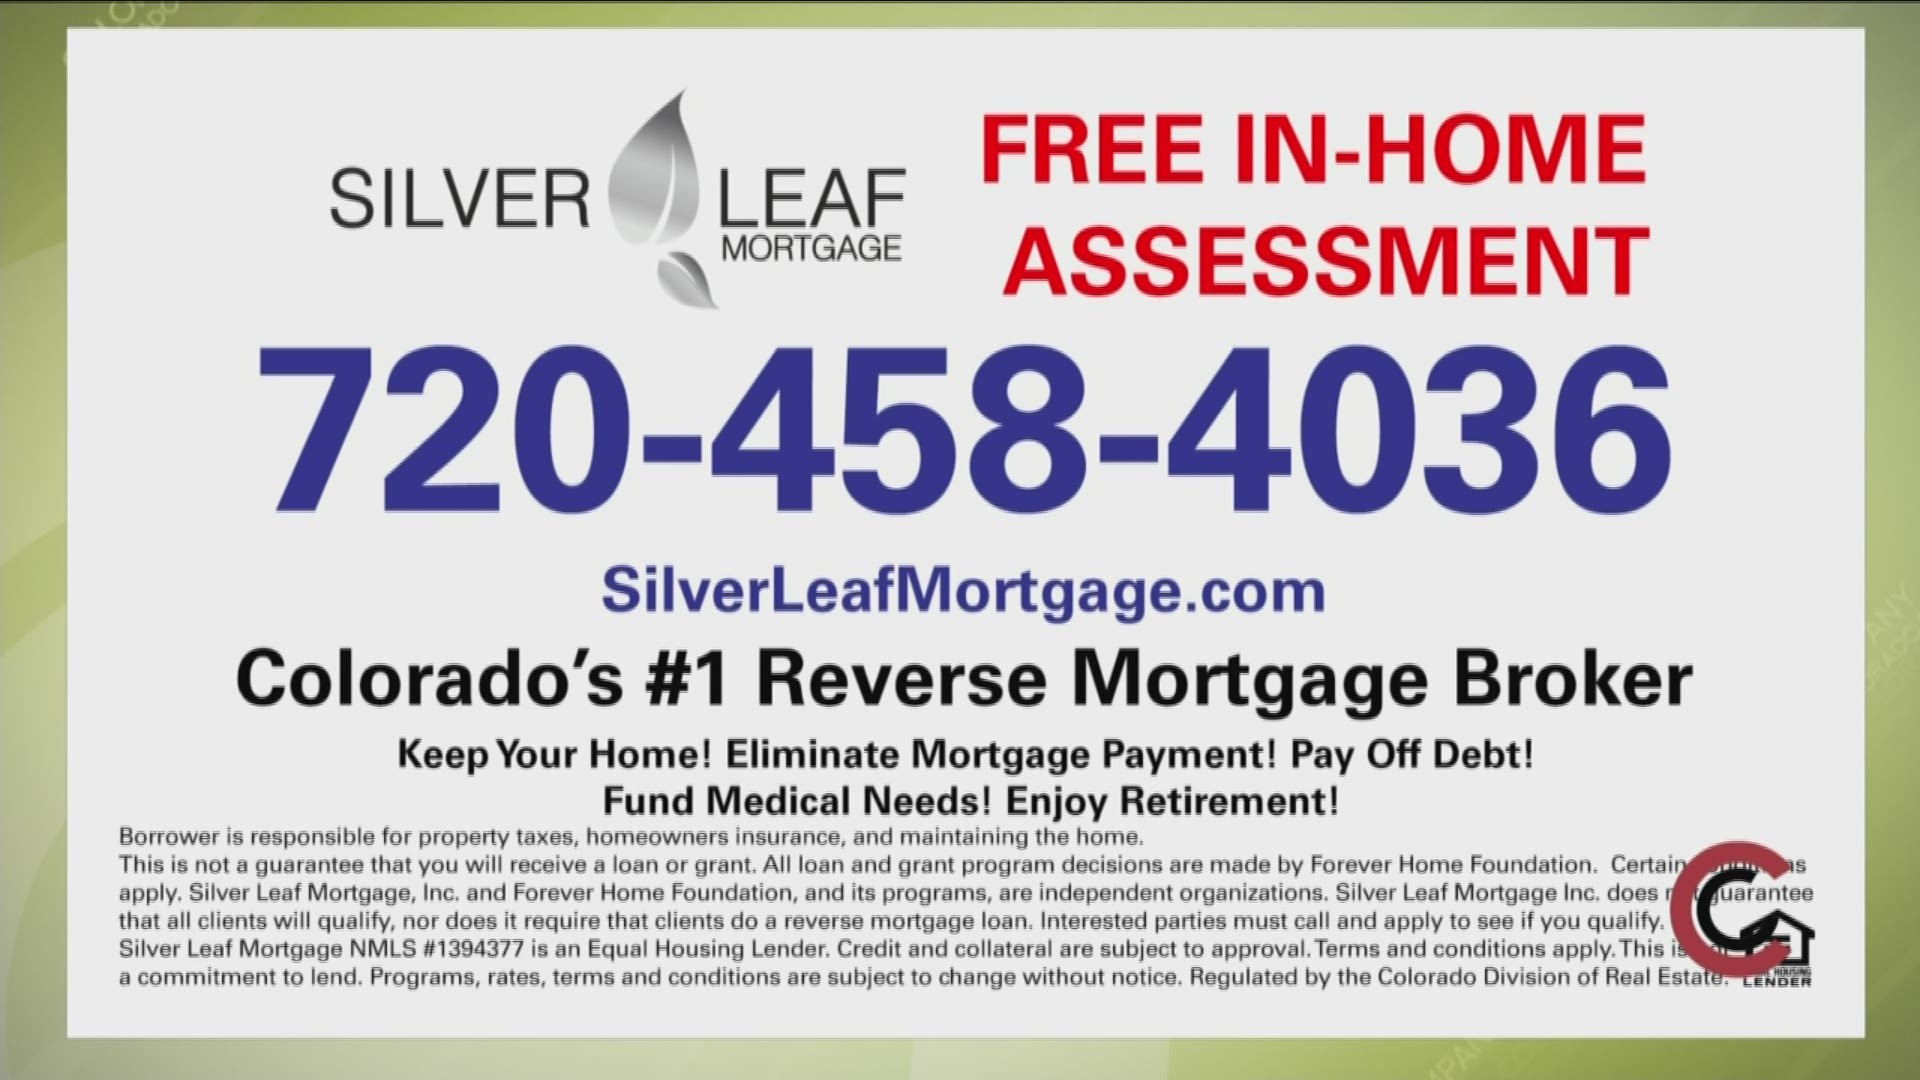 Call 720.458.4036 or visit SilverLeafMortgage.com to find out if a reverse mortgage is right for you. They're the number one reverse mortgage provider in Colorado!